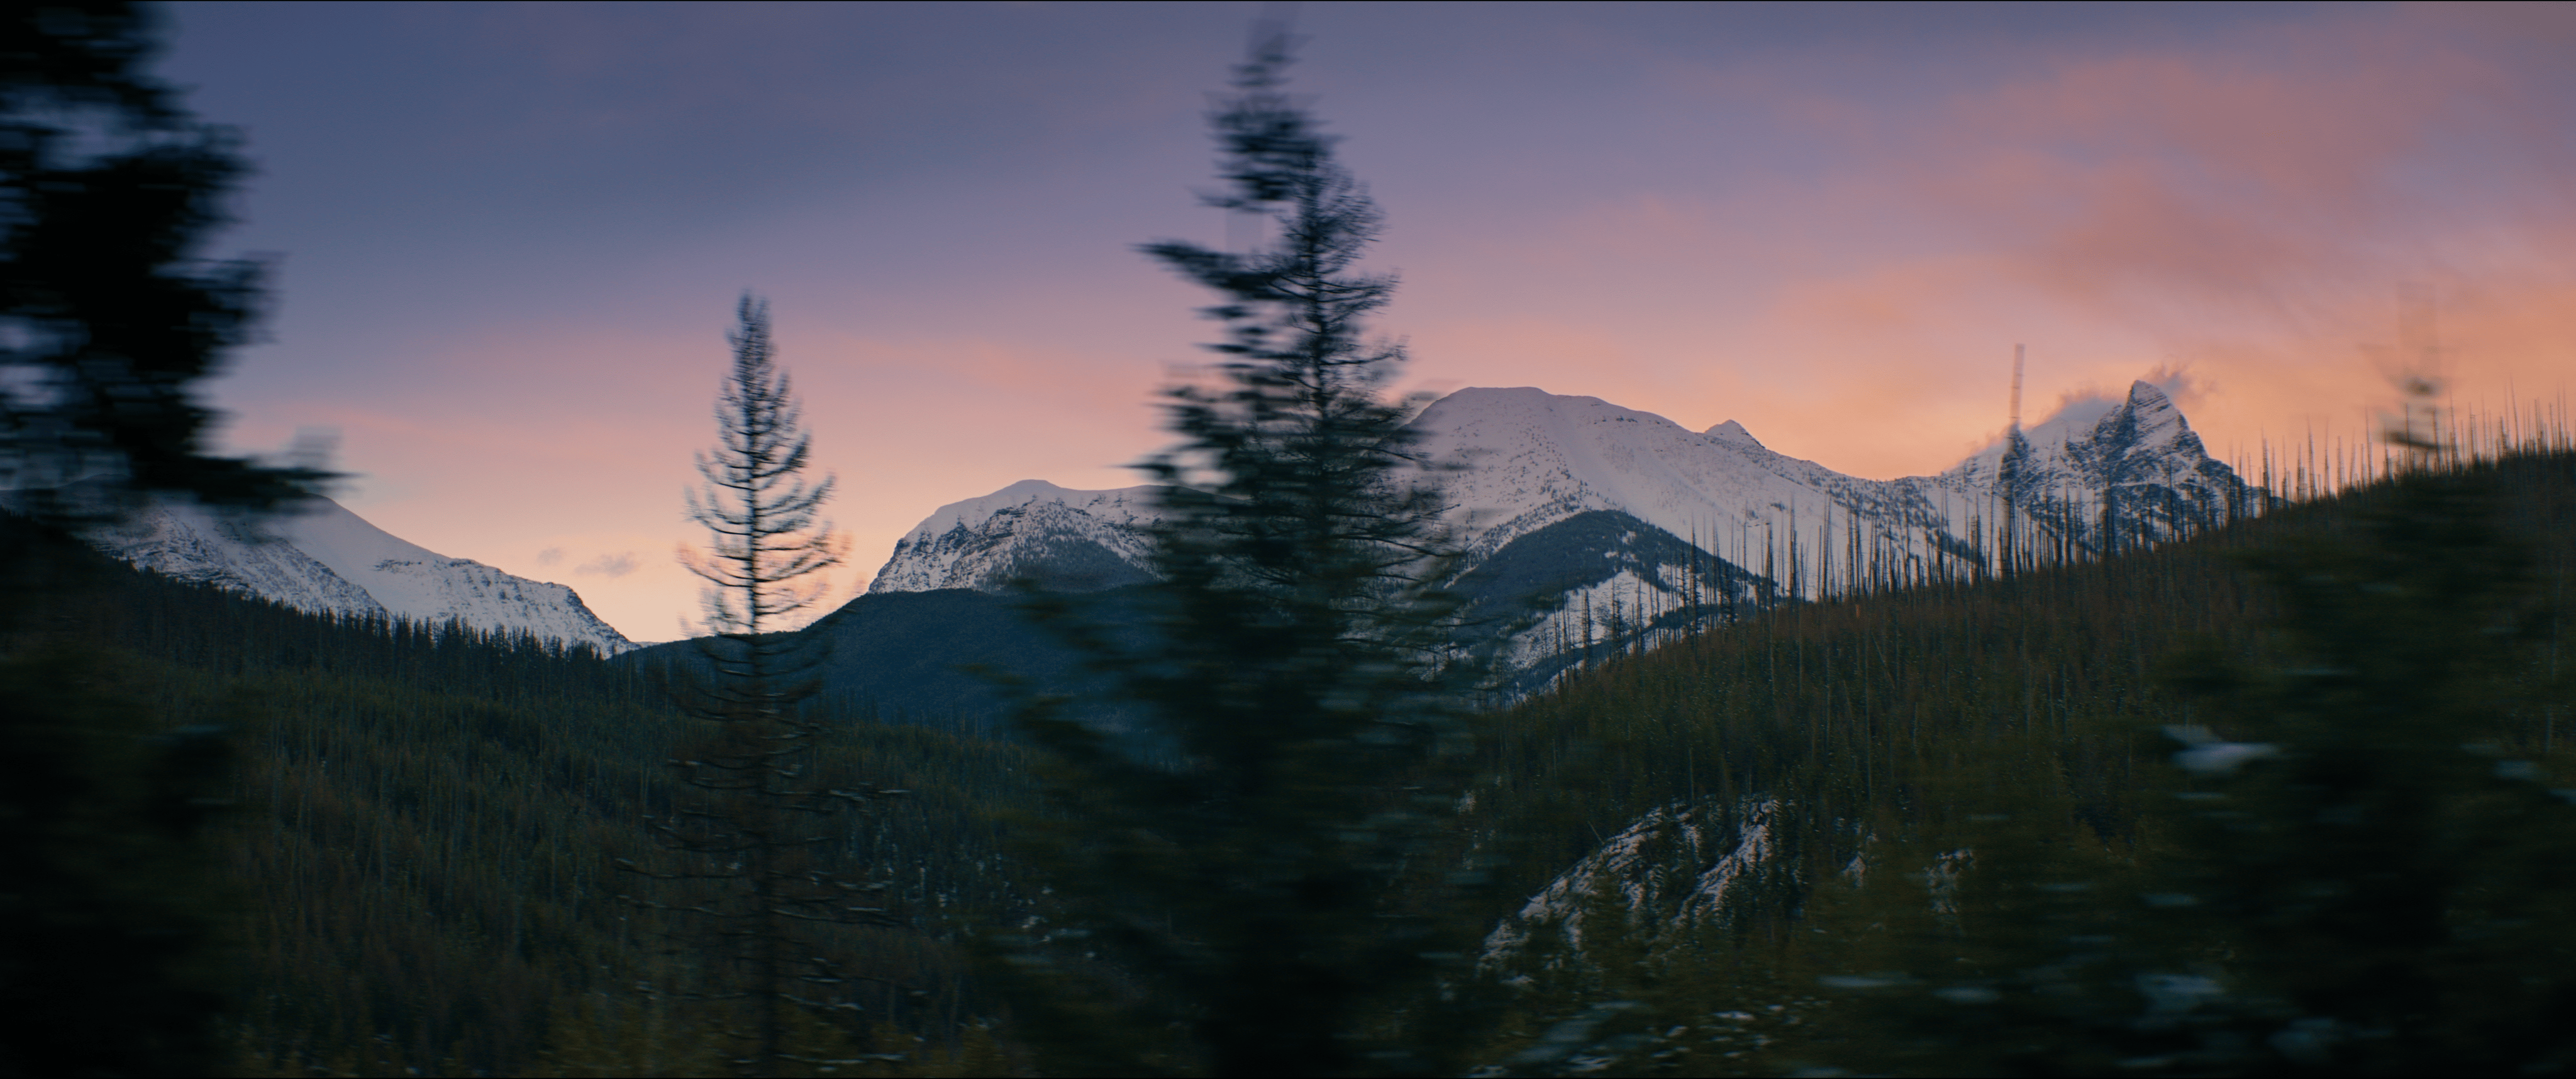 Photo of sunset with purple and pink skies. Mountains with snow in the background. Pine trees in the front.